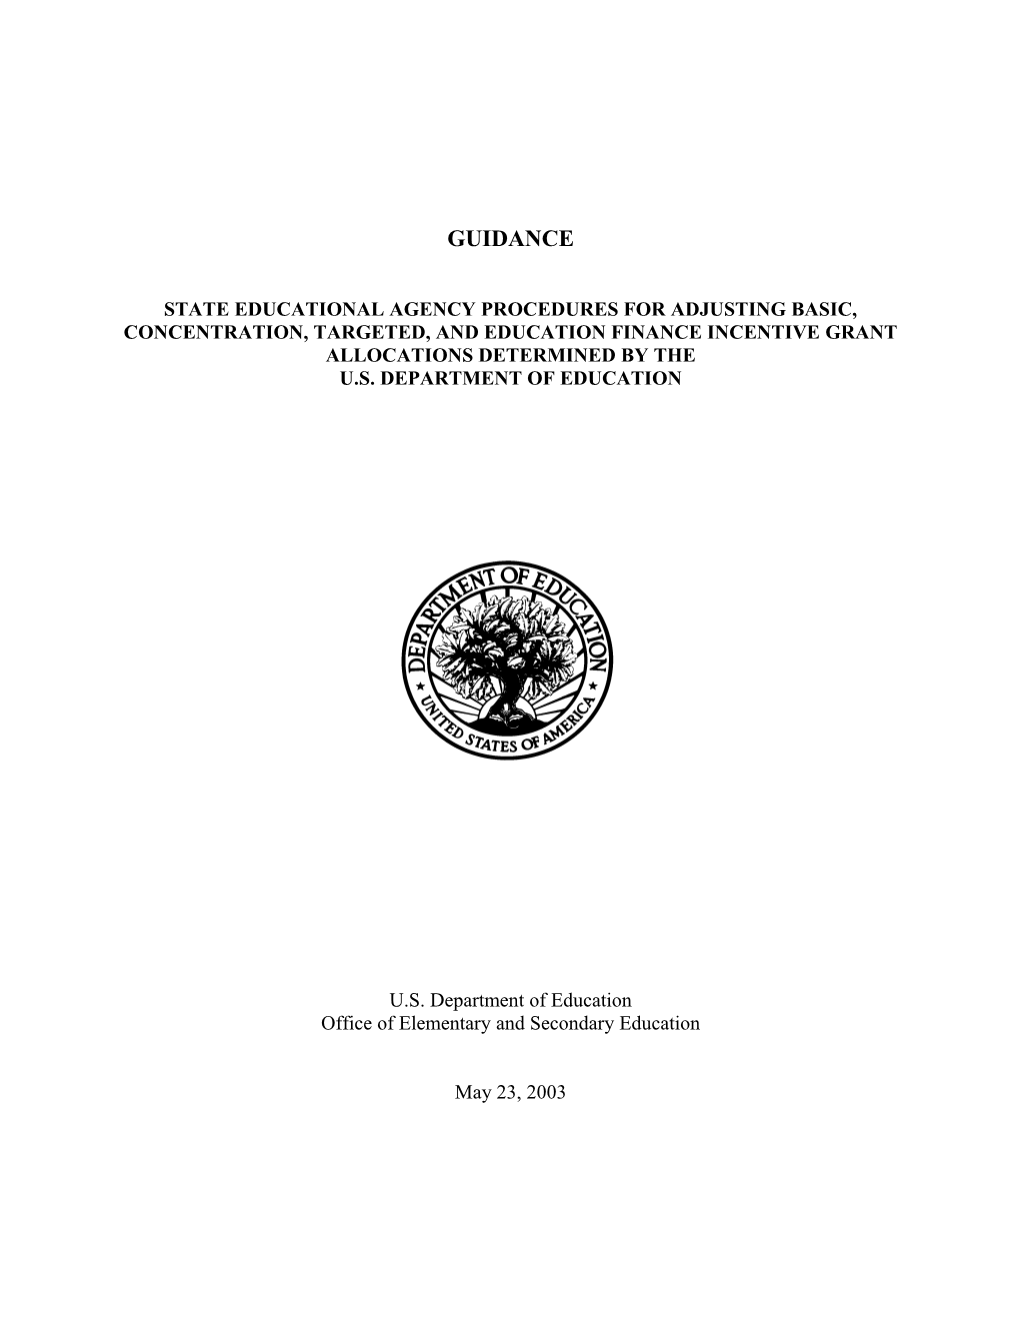 State Educational Agency Procedures for Adjusting Basic, Concentration, Targeted and Education